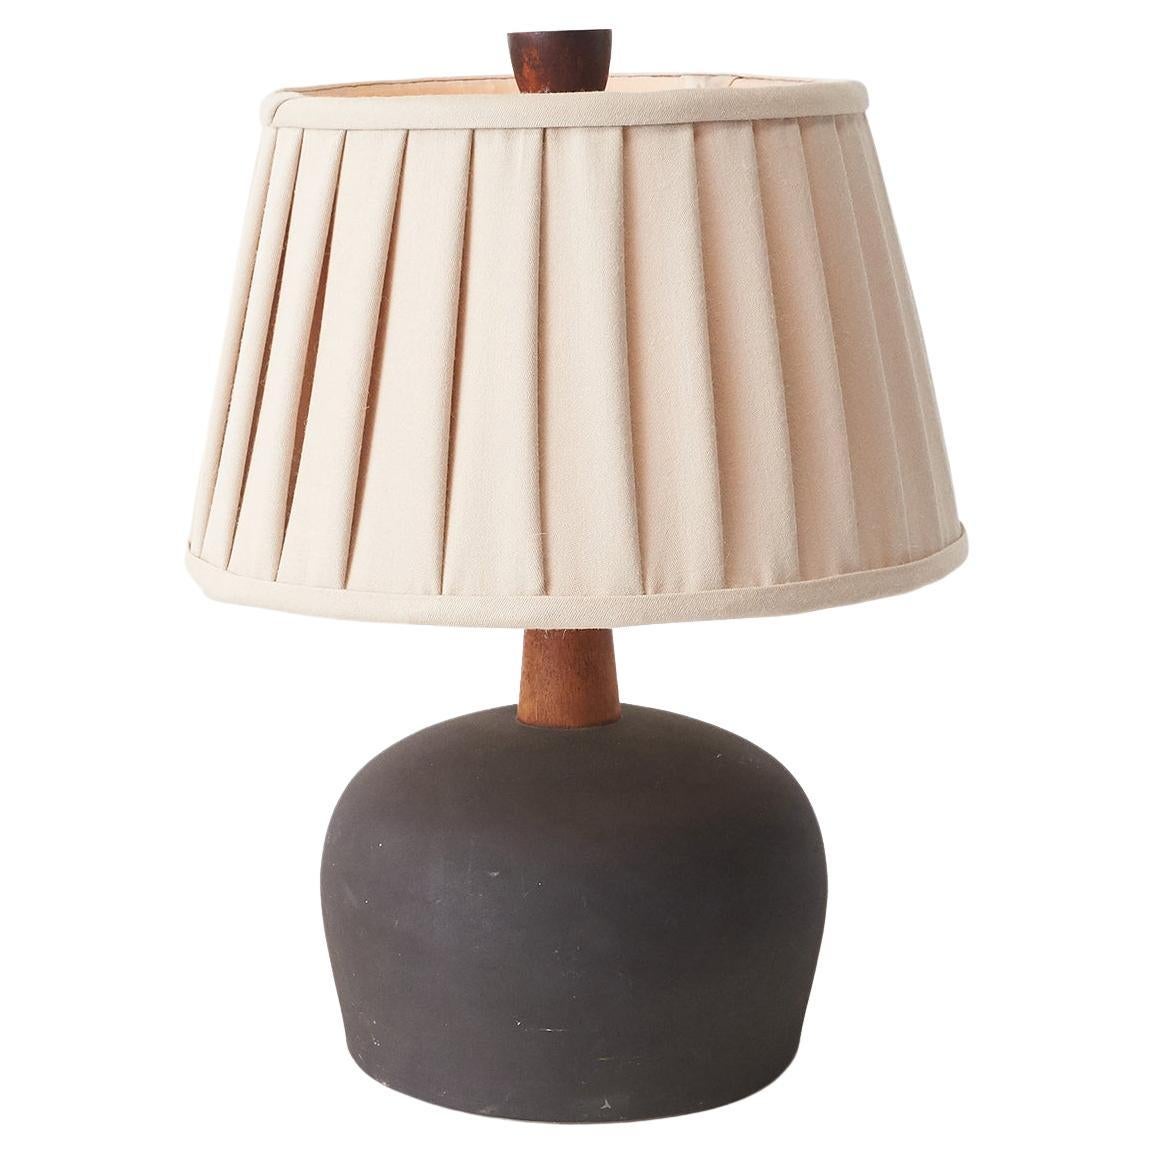 Jane and Gordon Martz Table Lamp with Hand-Crafted Pleated Shade